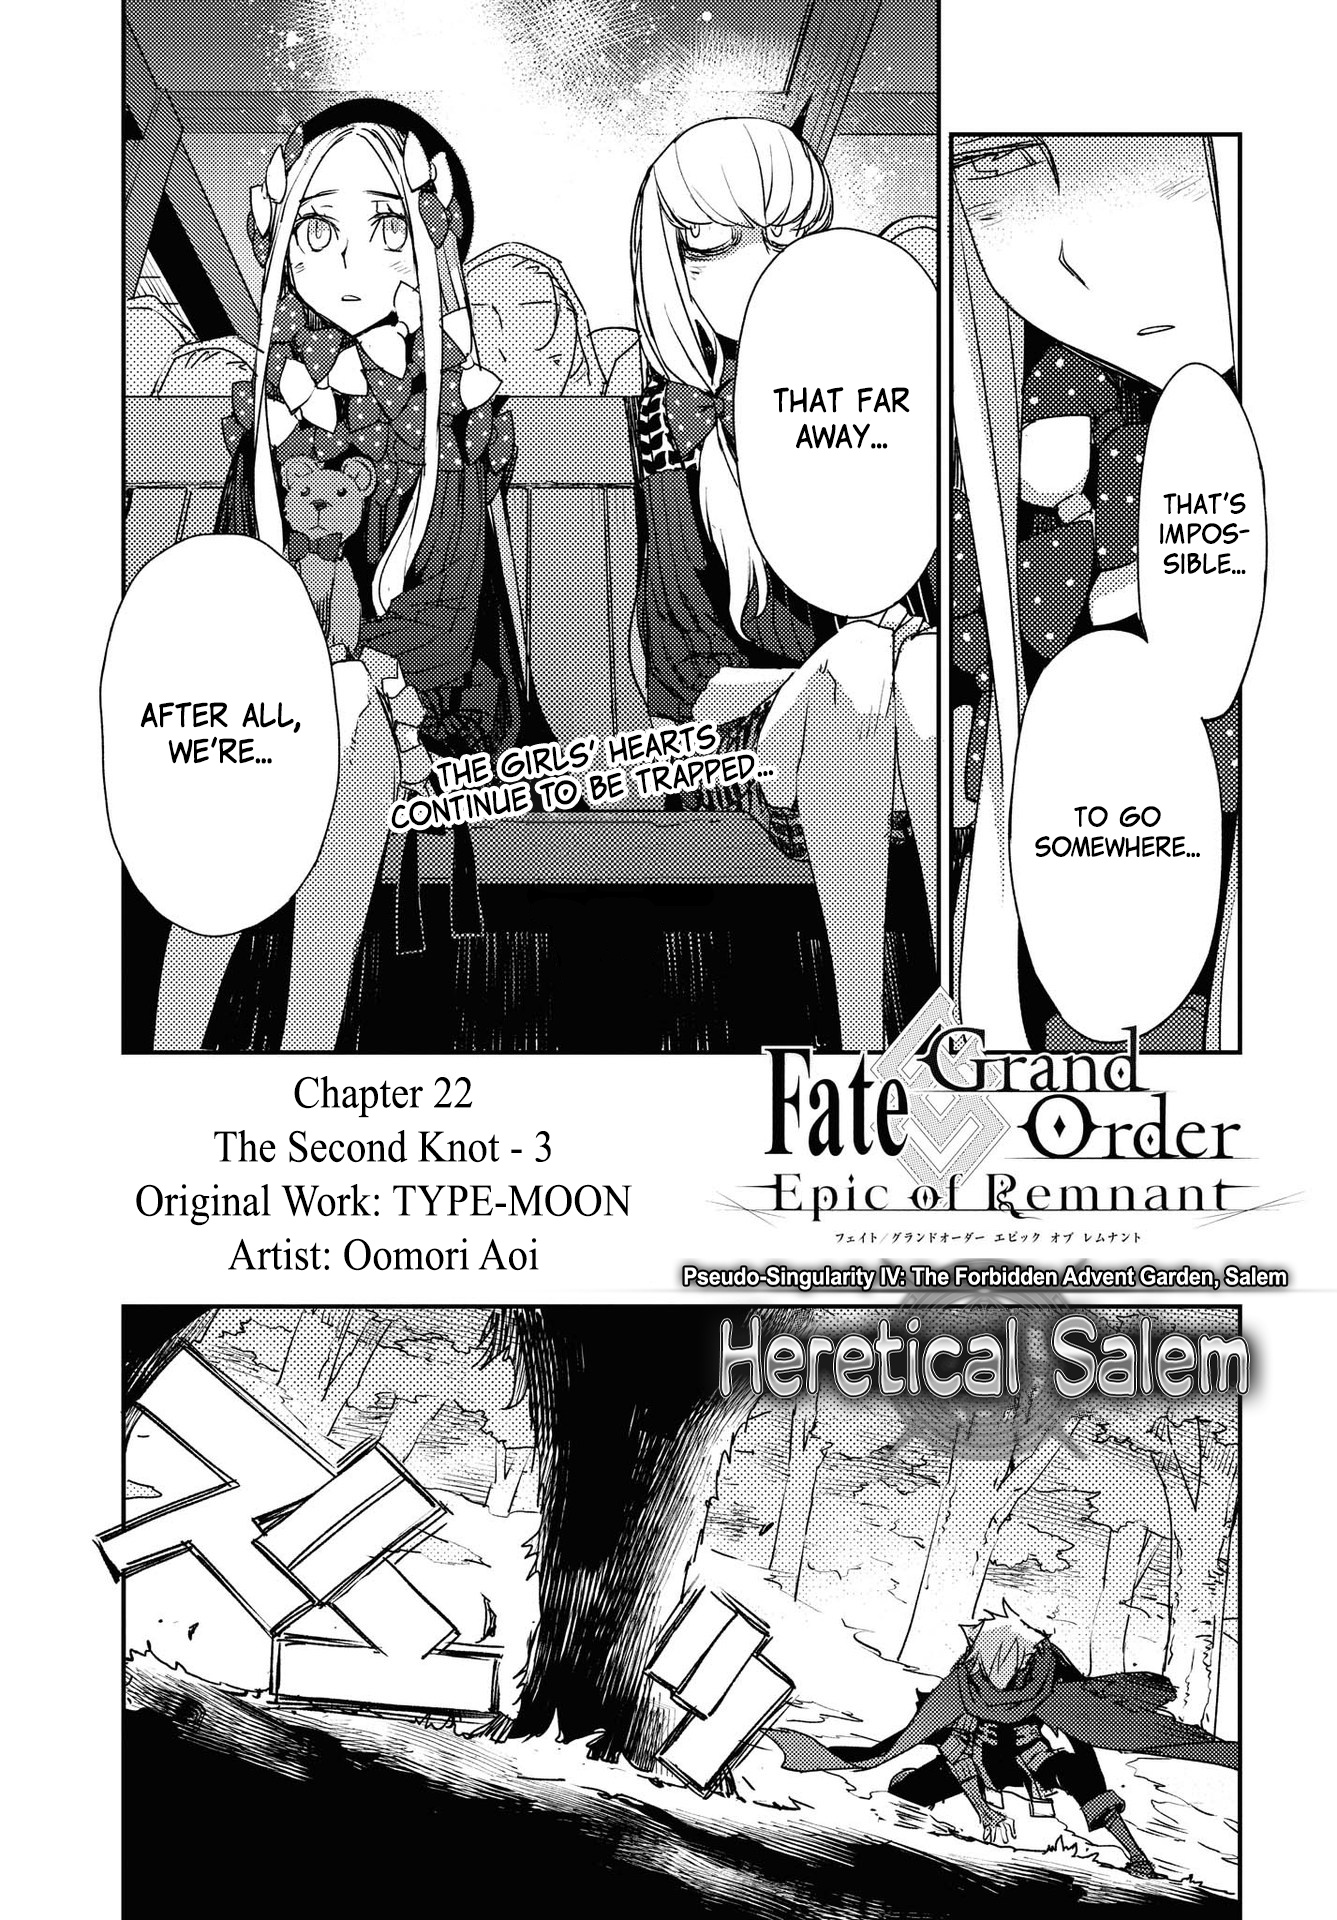 Fate/grand Order: Epic Of Remnant: Pseudo-Singularity Iv: The Forbidden Advent Garden, Salem - Heretical Salem Chapter 22: The Second Knot - 3 - Picture 3